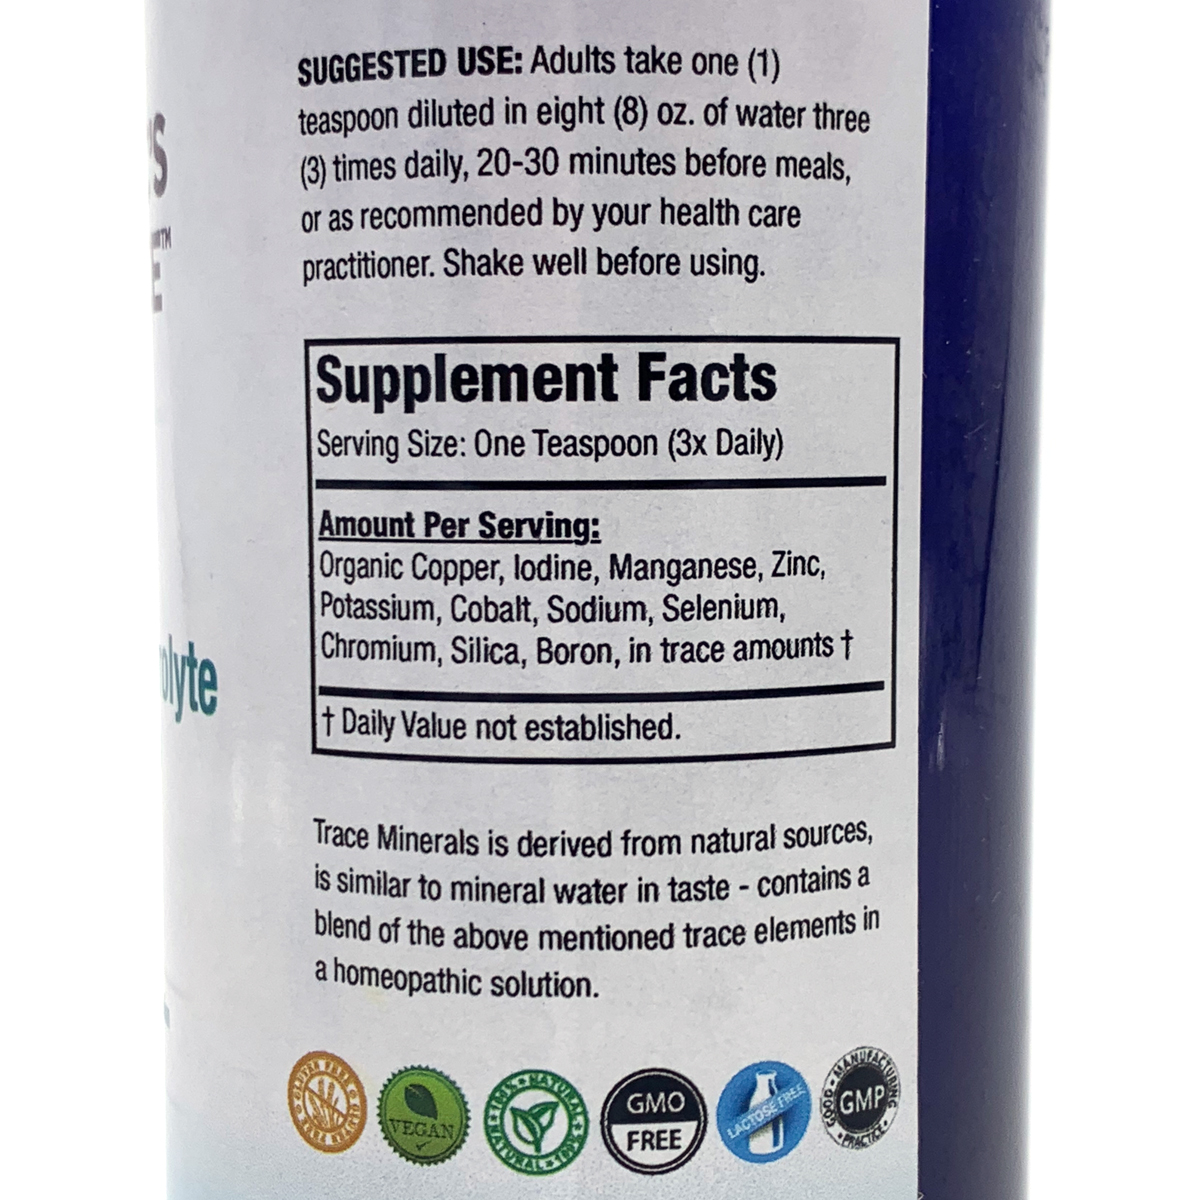 Crown_Wellness_Crystalloid_Electrolyte_trace_minerals_16oz_5